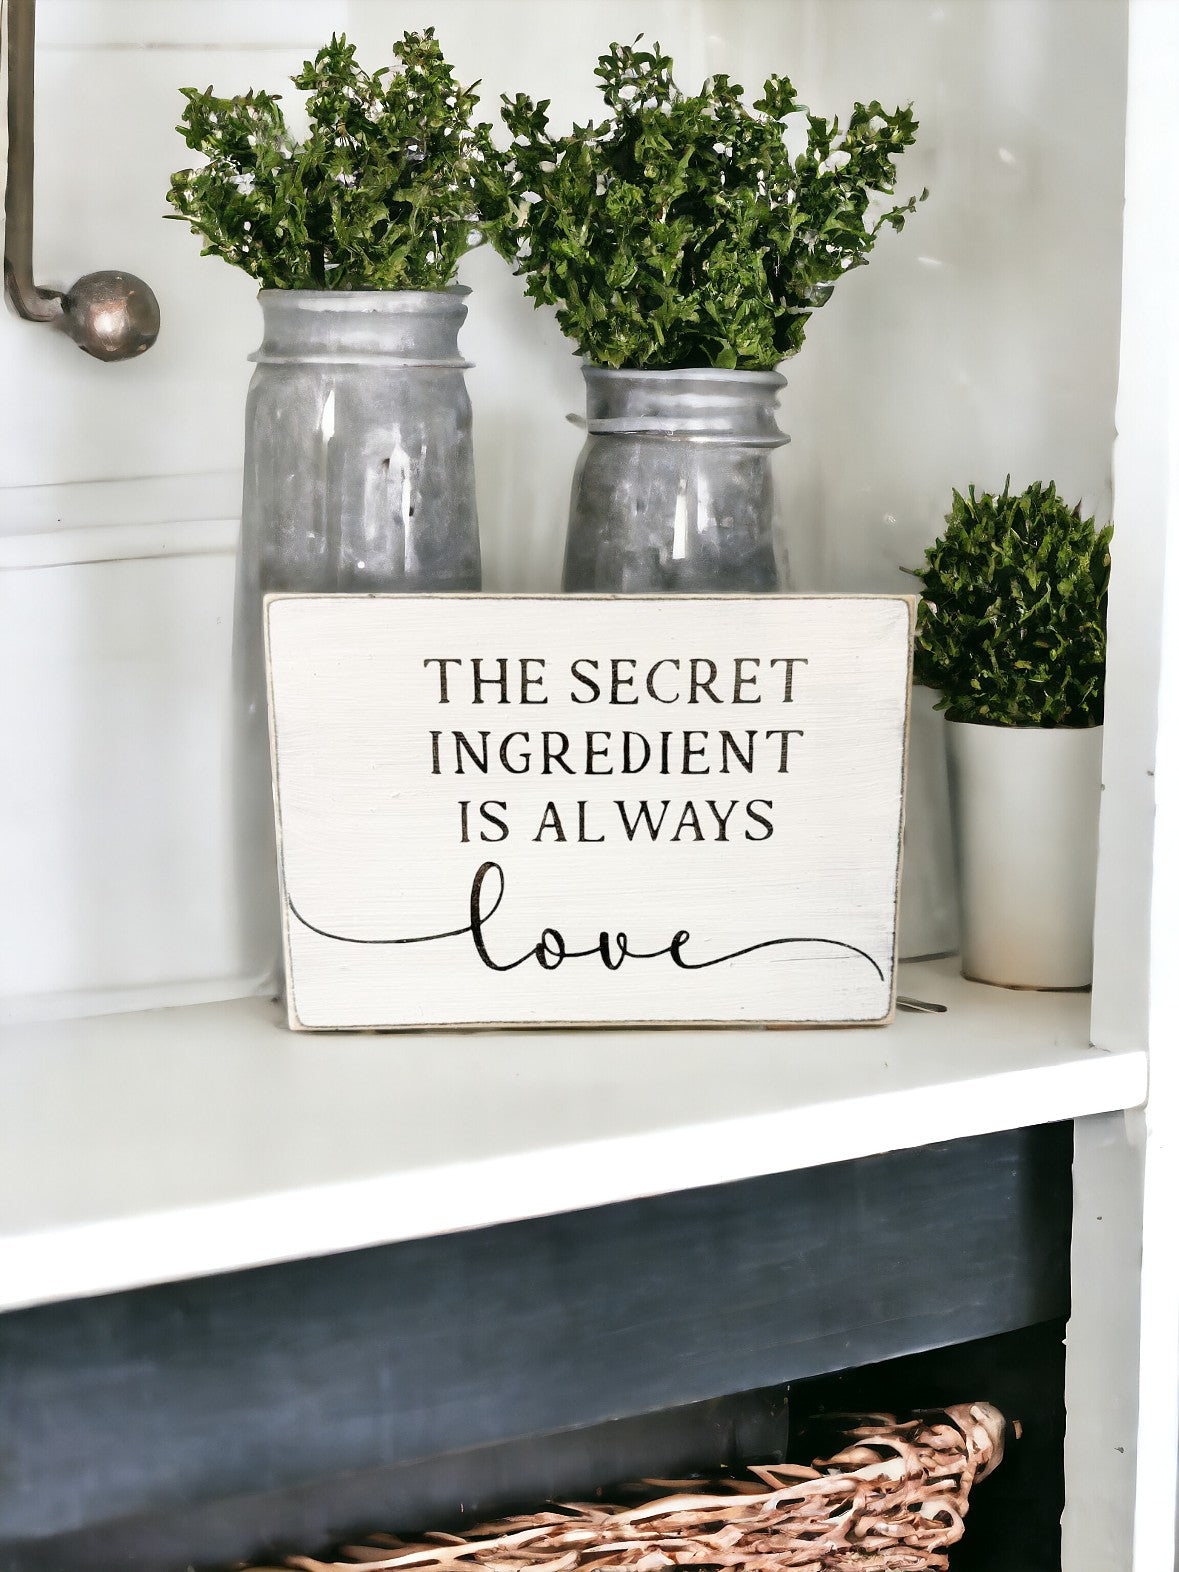 Heartfelt Wooden Kitchen Sign: The Secret Ingredient is Always Love - Hand-Painted White with Black Text, Perfect for Farmhouse Wall Art and Kitchen Shelf Decor